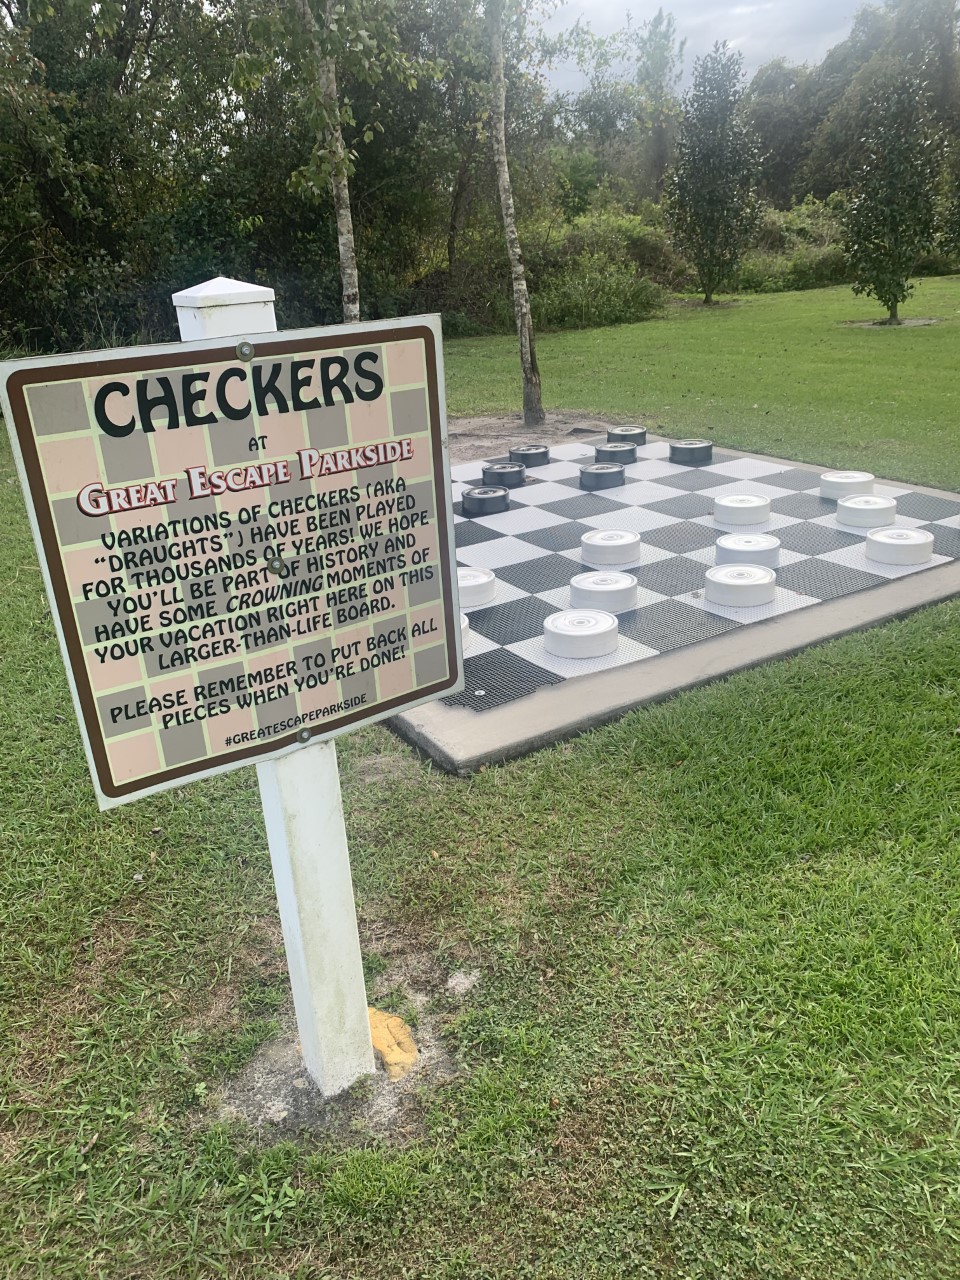 Photo of outdoor checkers game at Great Escape Parkside